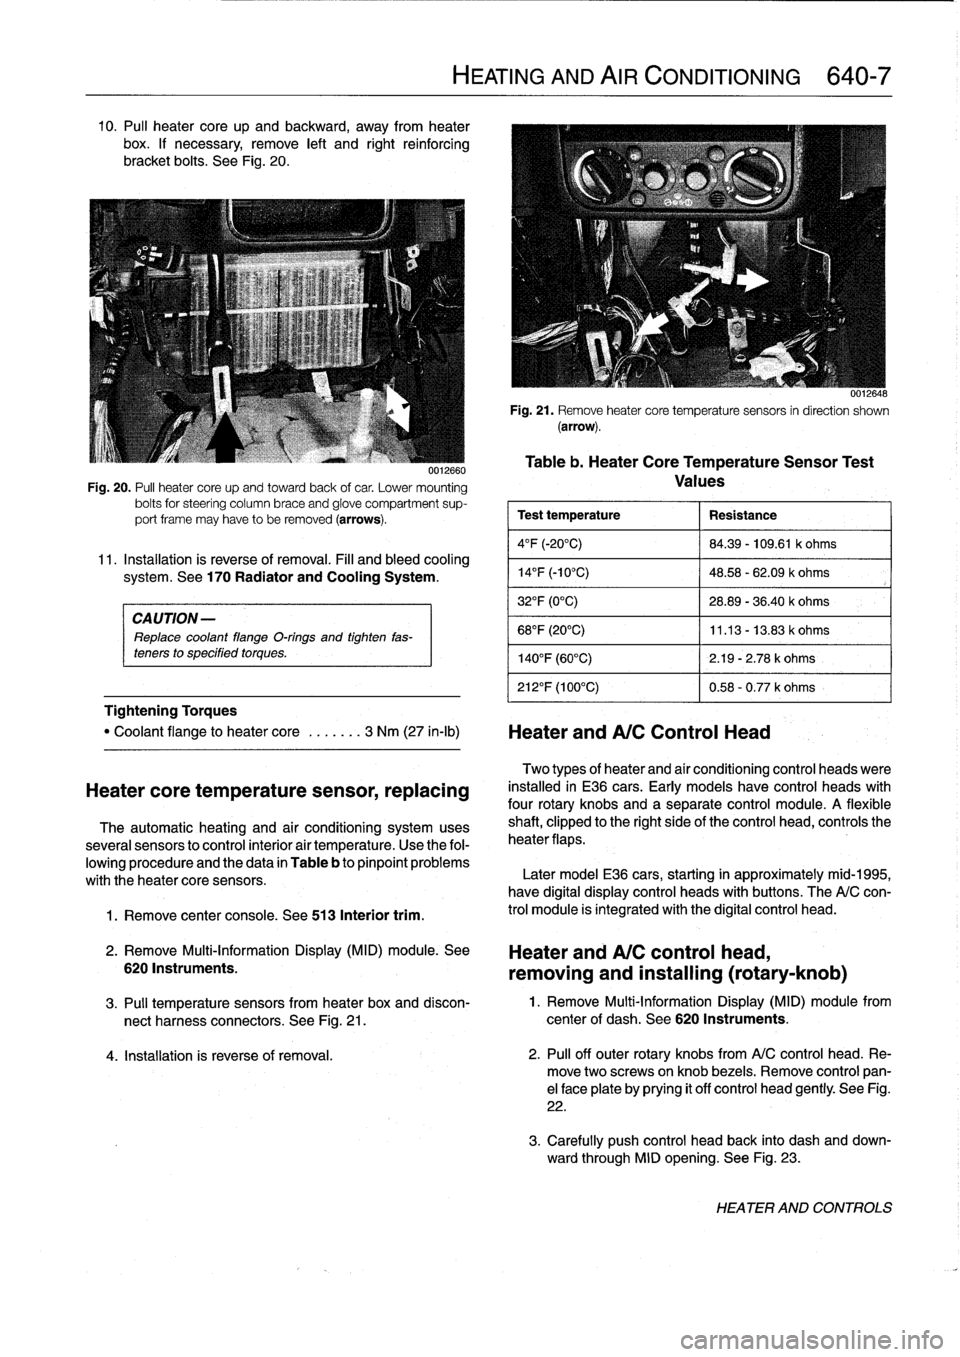 BMW 318i 1997 E36 User Guide 10
.
Pul¡
heater
core
up
and
backward,
away
from
heater
box
.
If
necessary,
remove
left
and
right
reinforcing
bracket
bolts
.
See
Fig
.
20
.

CAUTION-

Replace
coolant
flange
O-rings
and
tighten
fas-